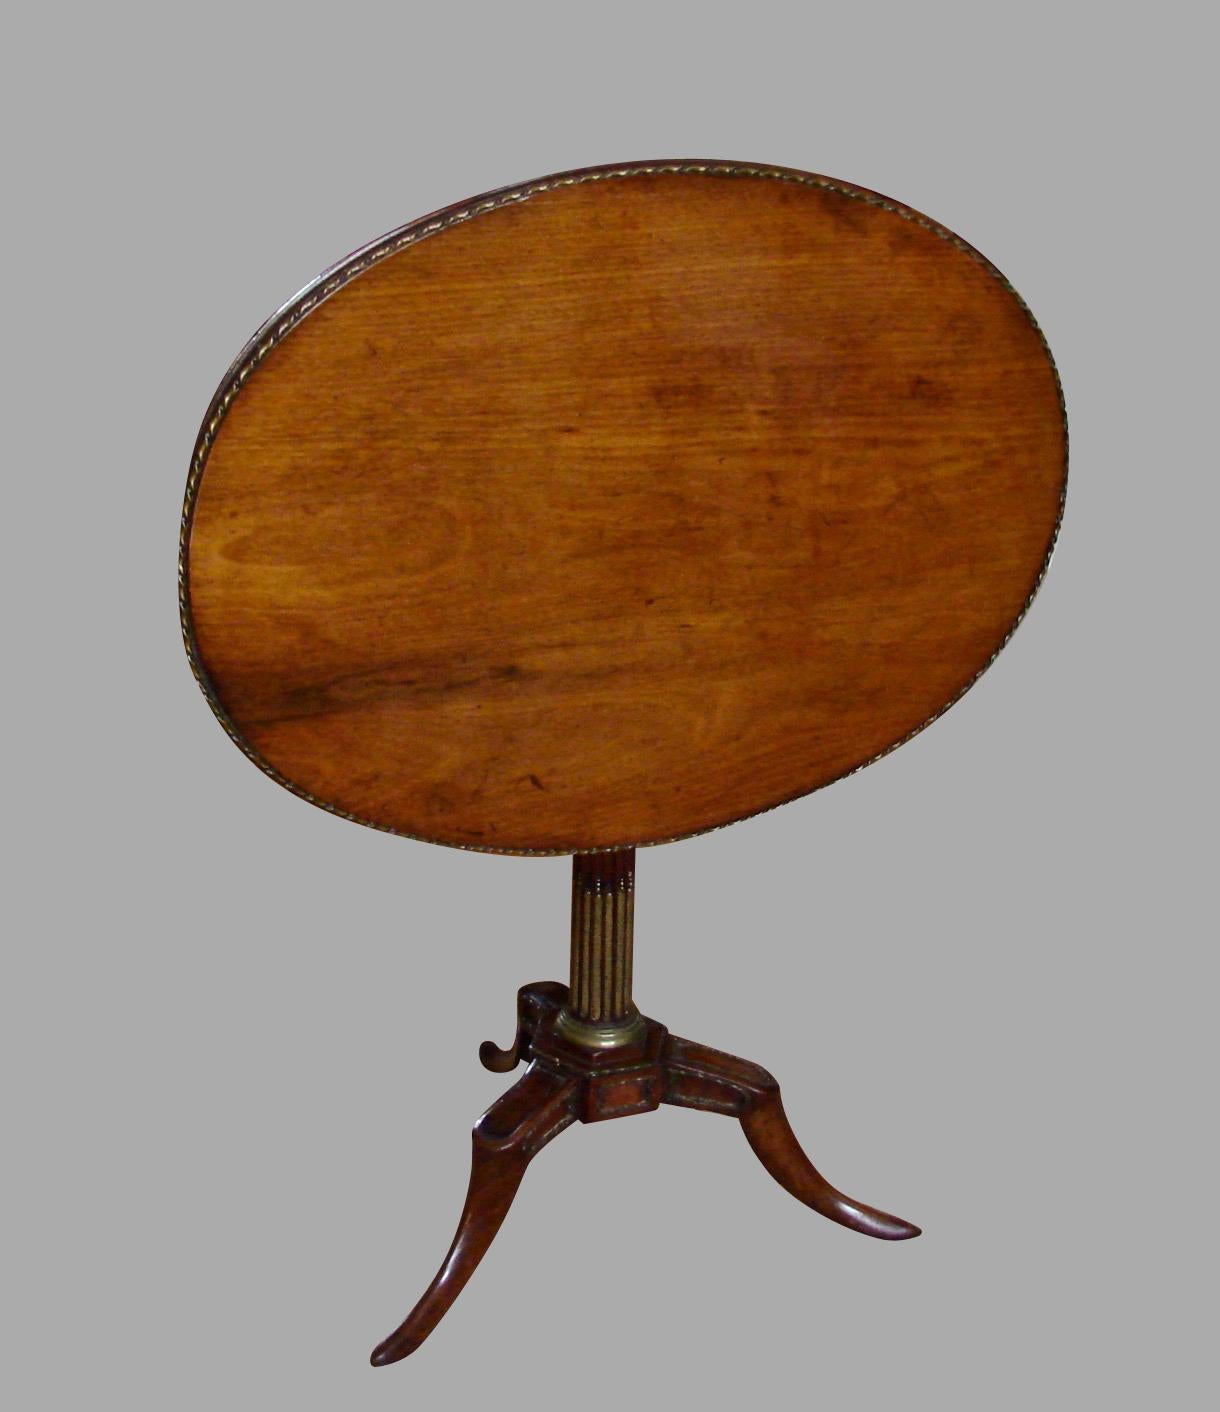 A pretty French metal-mounted walnut Empire style tilt-top tea table, the oval top with an applied rope twist metal edge supported on a reeded standard terminating in a tripod base and slipper feet, circa 1820.